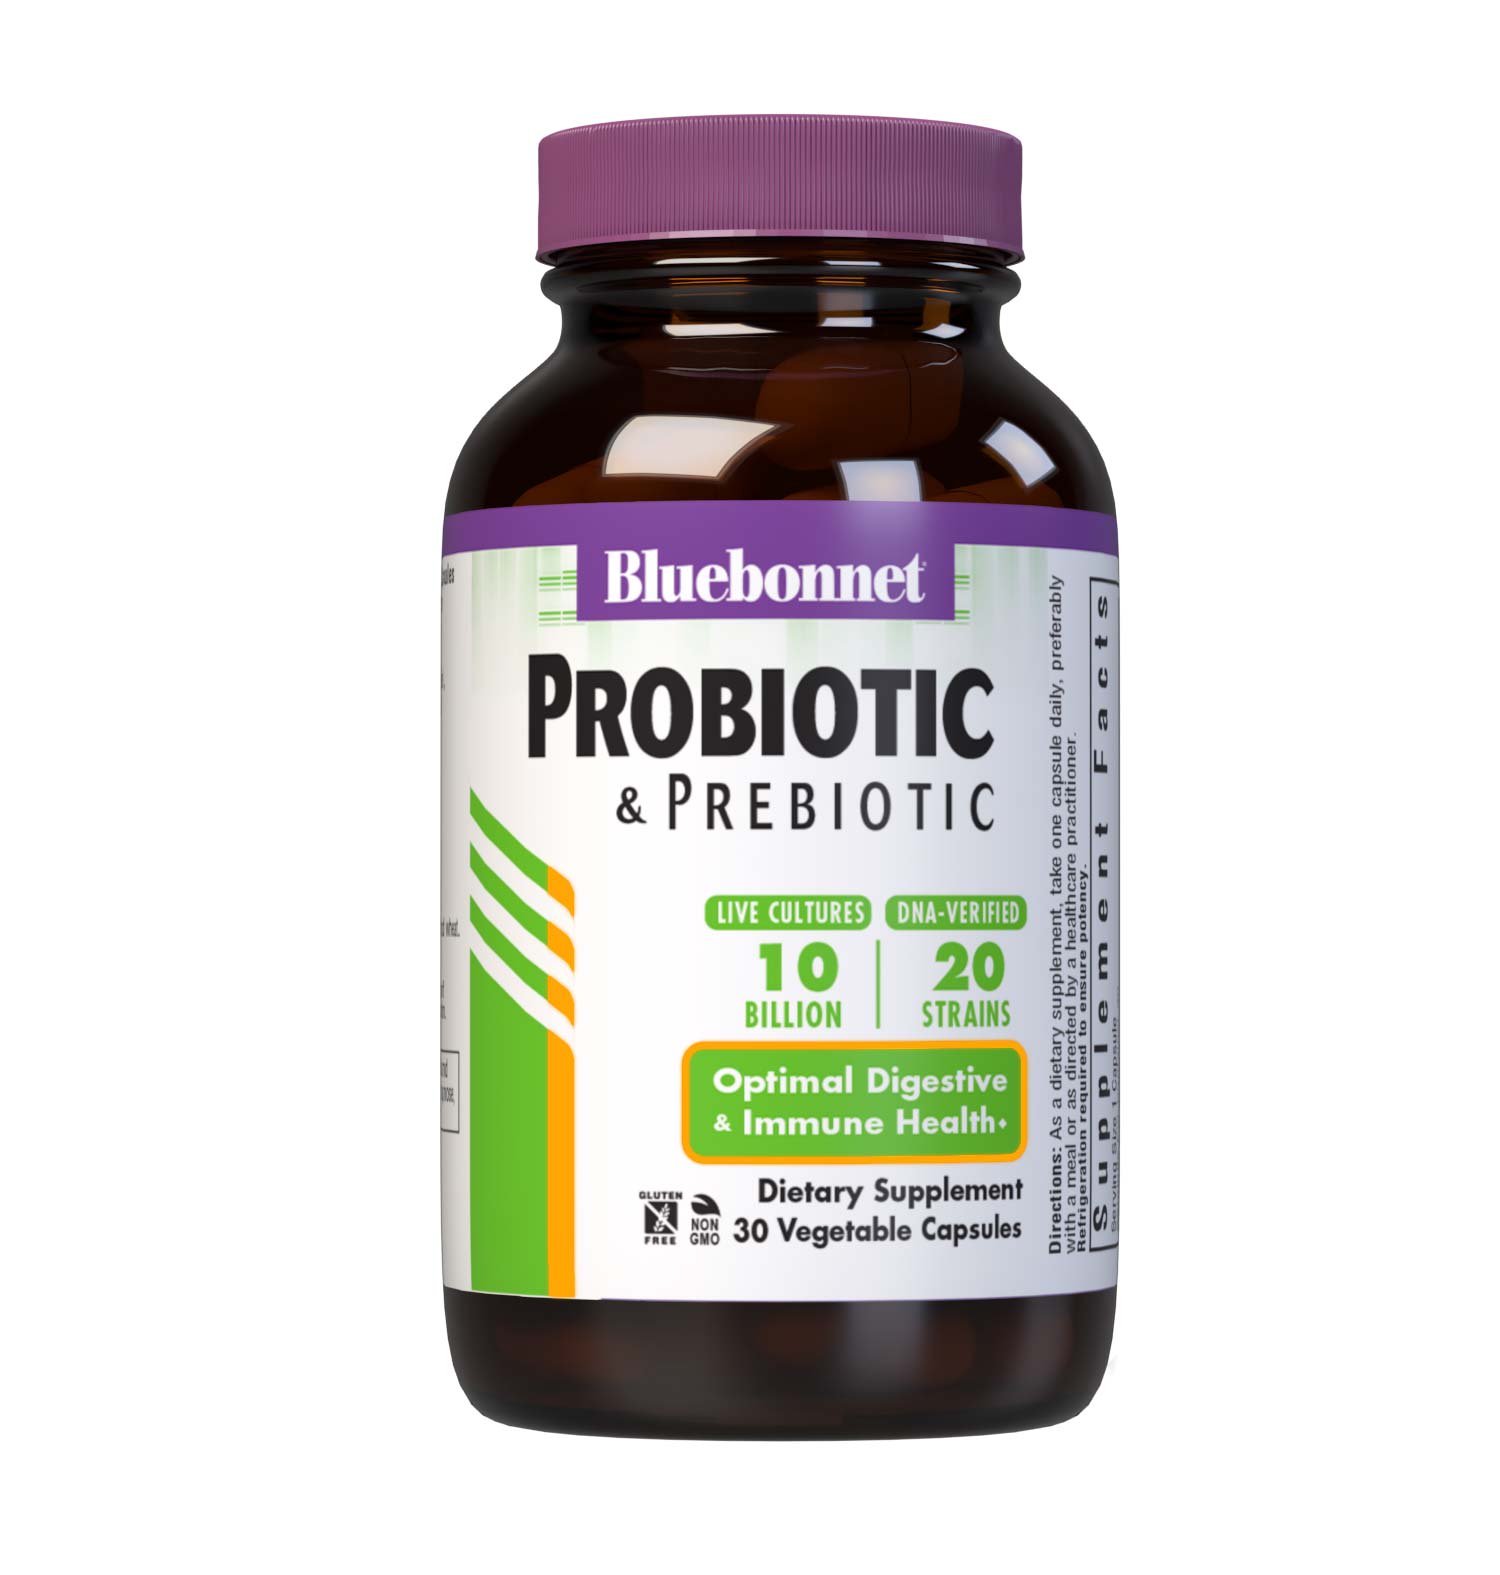 Bluebonnet’s Probiotic & Prebiotic 30 Vegetable Capsules are formulated with 10 billion viable cultures from 20 DNA-verified, scientifically supported strains. This unique, science-based probiotic formula includes the prebiotic inulin from chicory root extract, to assist the growth of friendly bacterium in the gut. #size_30 count